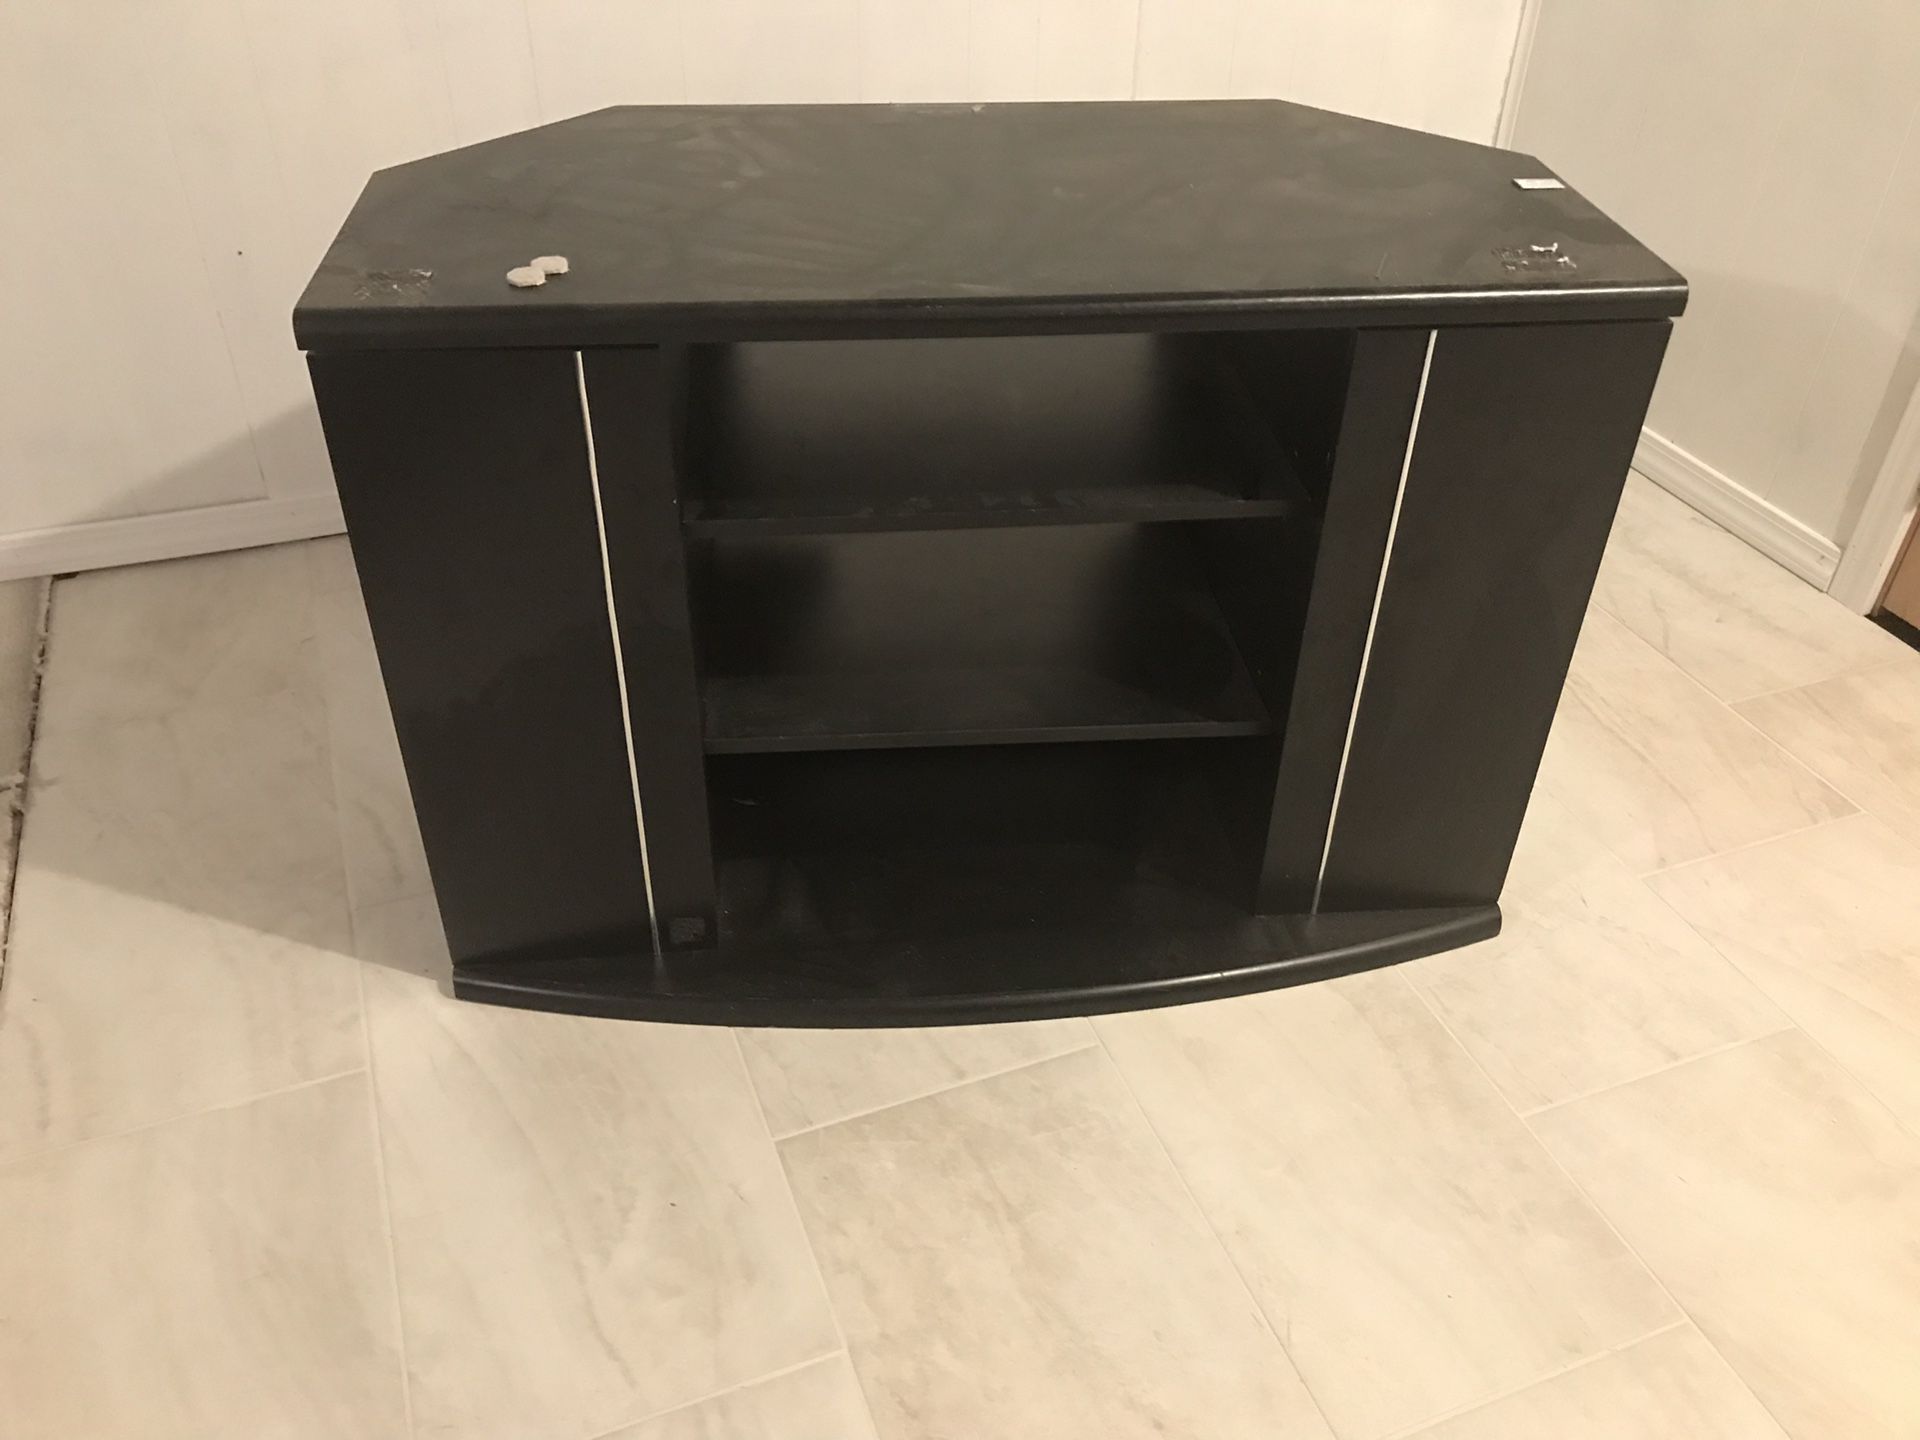 Medium size tv stand and shelf. Great for a kids/teenagers room. Super sturdy. About 42” wide